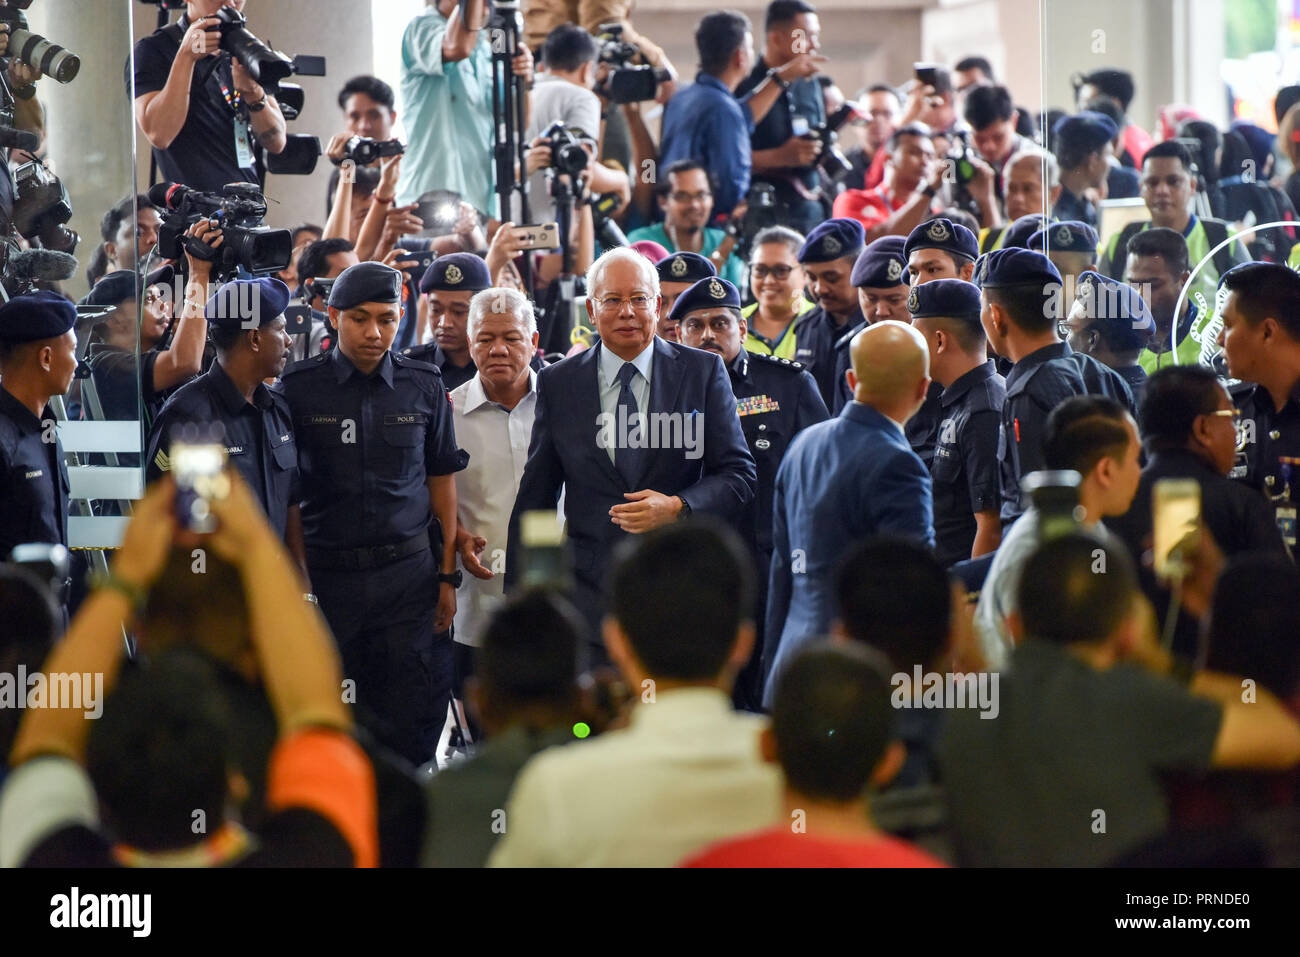 Kuala Lumpur, Malaysia. 4th Oct, 2018. Former Malaysian Prime Minister Najib Razak (C) arrives at a court in Kuala Lumpur, Malaysia, on Oct. 4, 2018. Rosmah Mansor, wife of former Malaysian Prime Minister Najib Razak, was charged on Thursday with money laundering and tax evasions as the country continues its probe into state investment firm 1Malaysia Development Berhad (1MDB). Credit: Chong Voon Chung/Xinhua/Alamy Live News Stock Photo